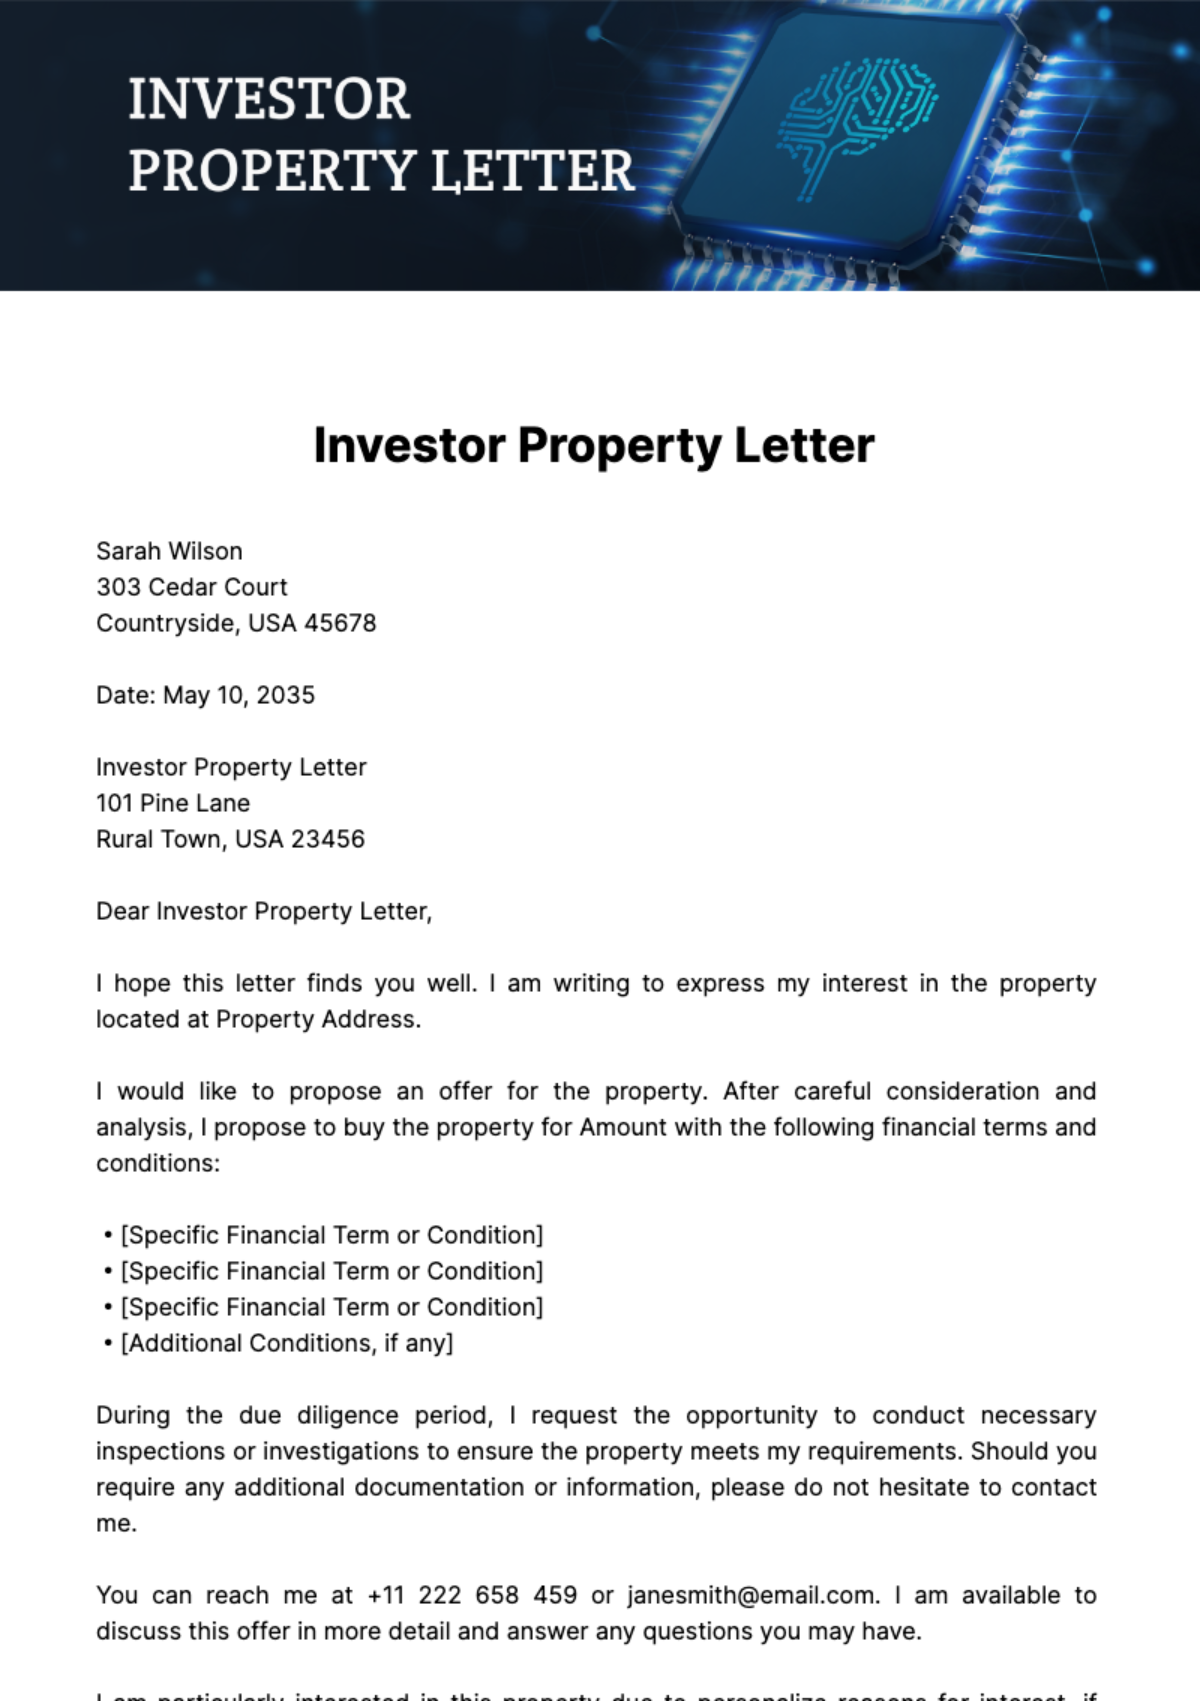 Investor Property Letter Template